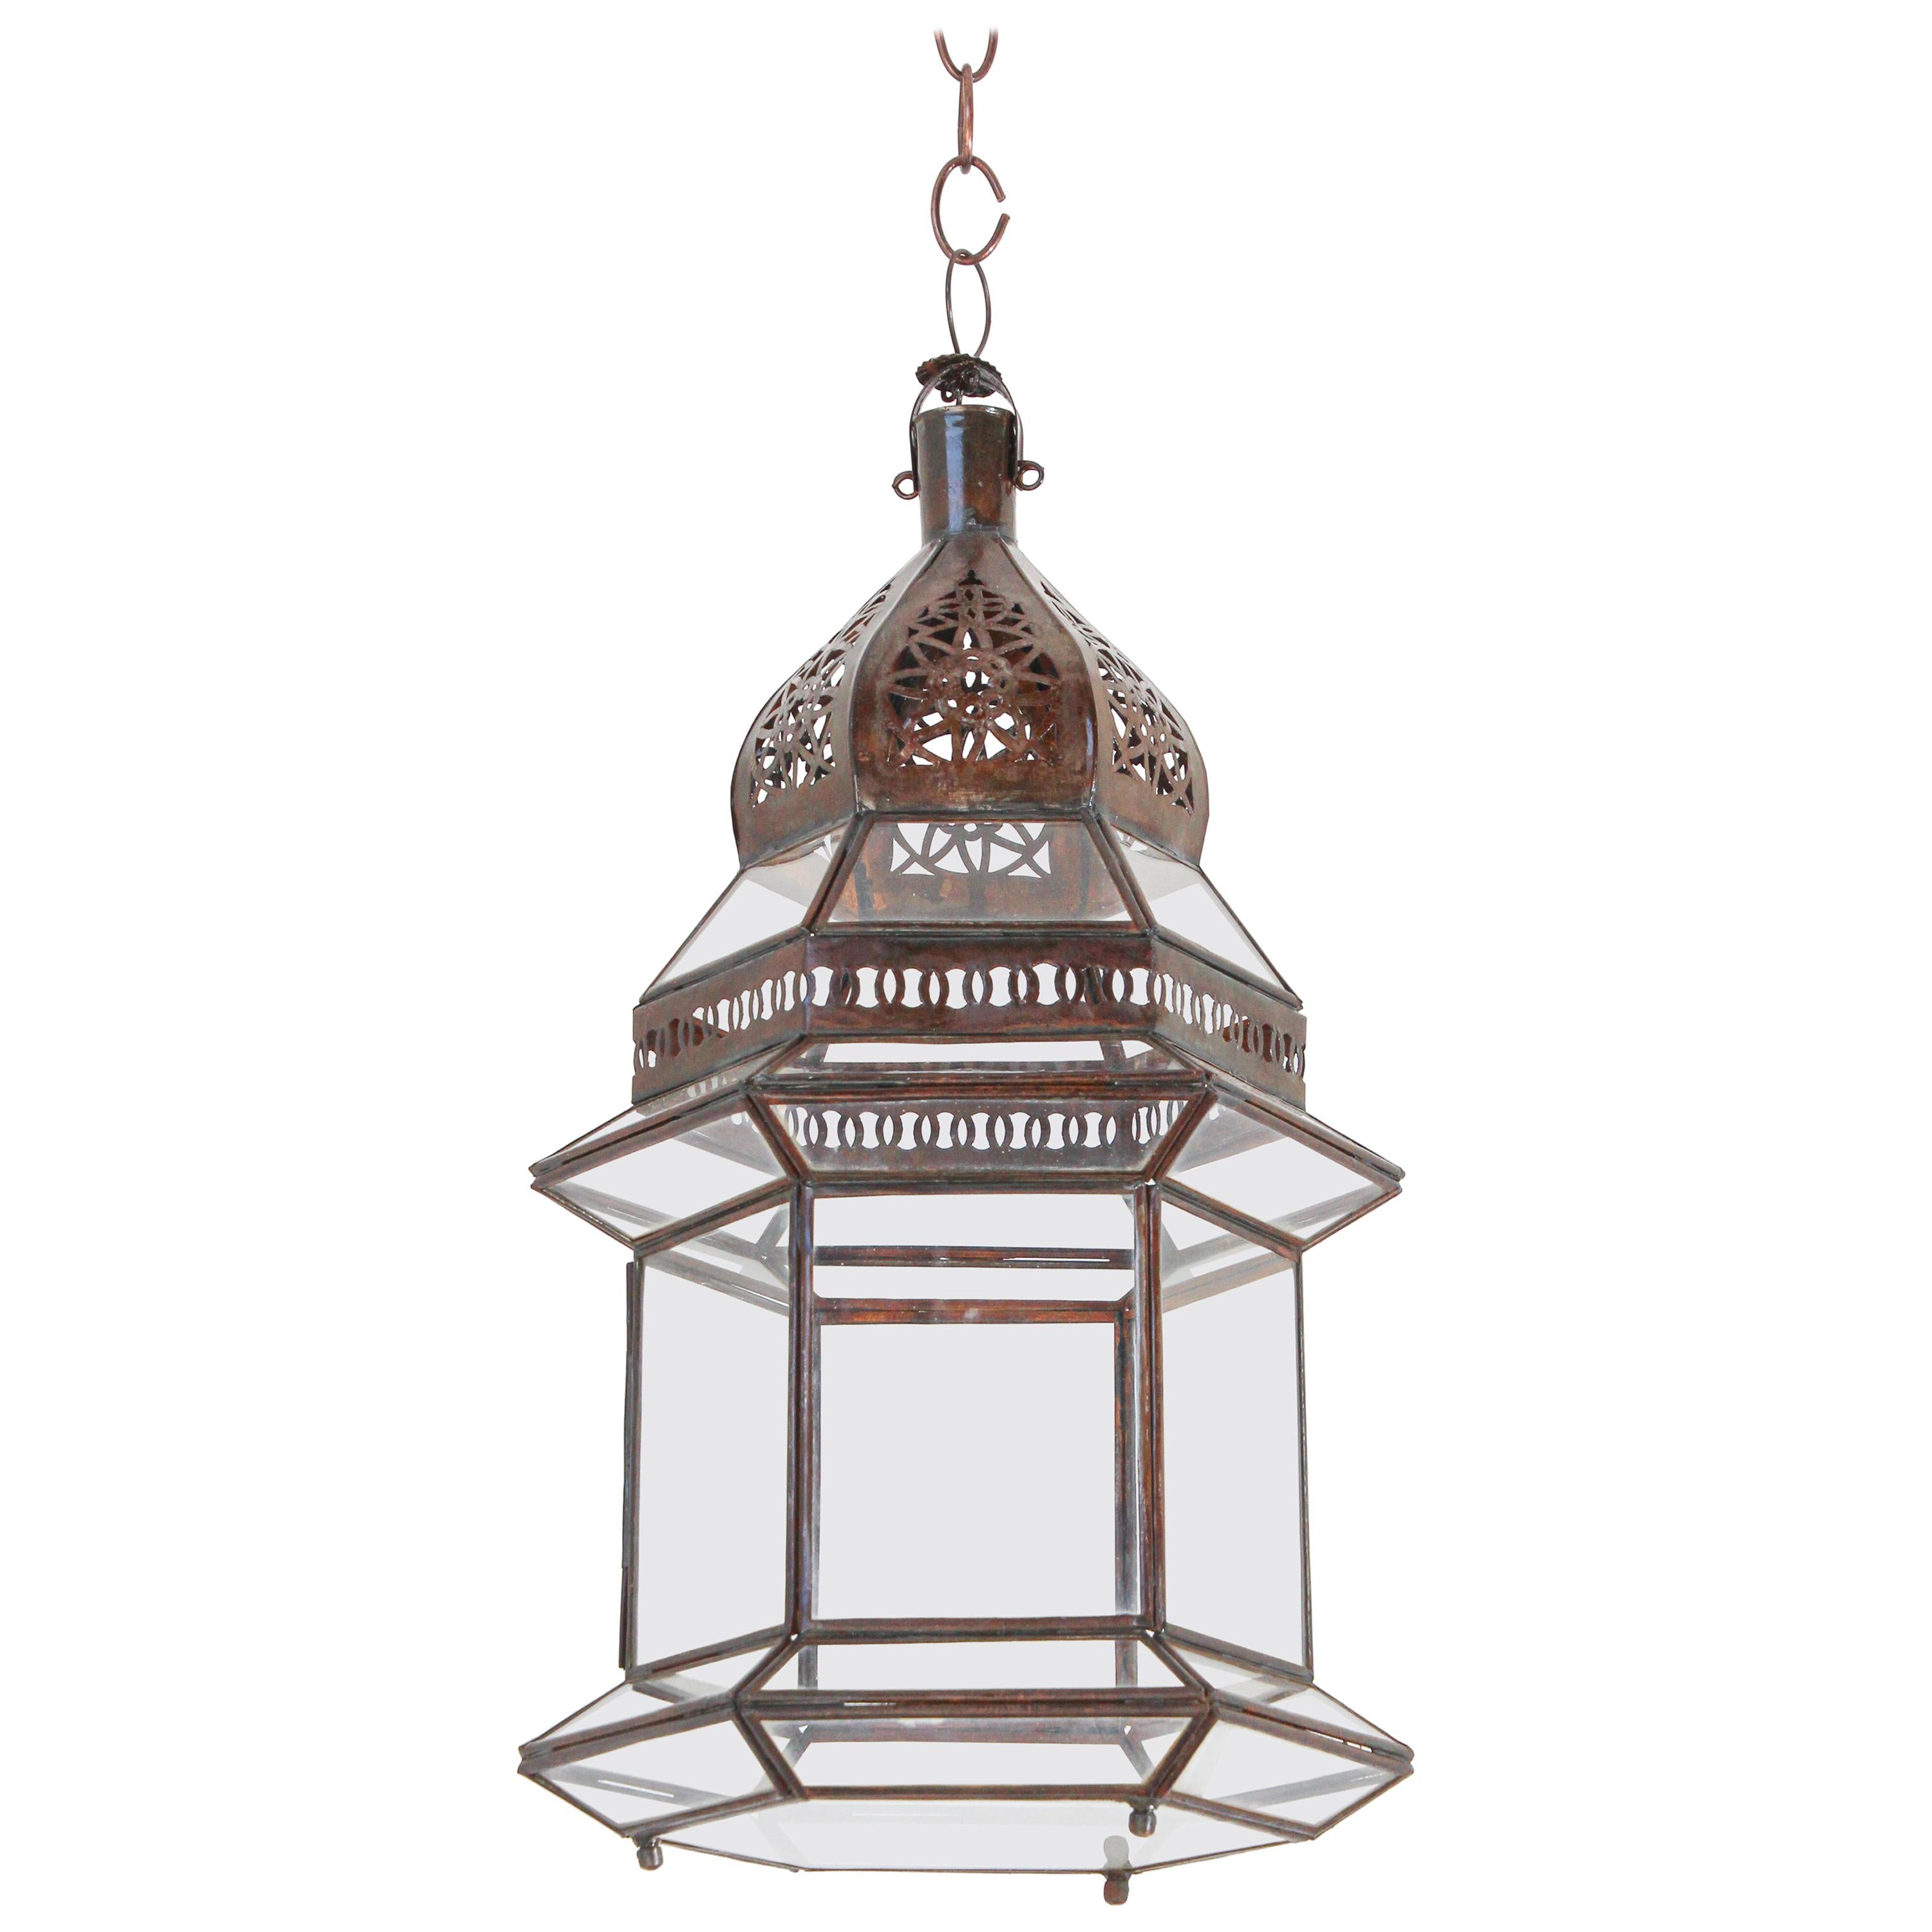 Handcrafted Moroccan Hanging Glass Lantern